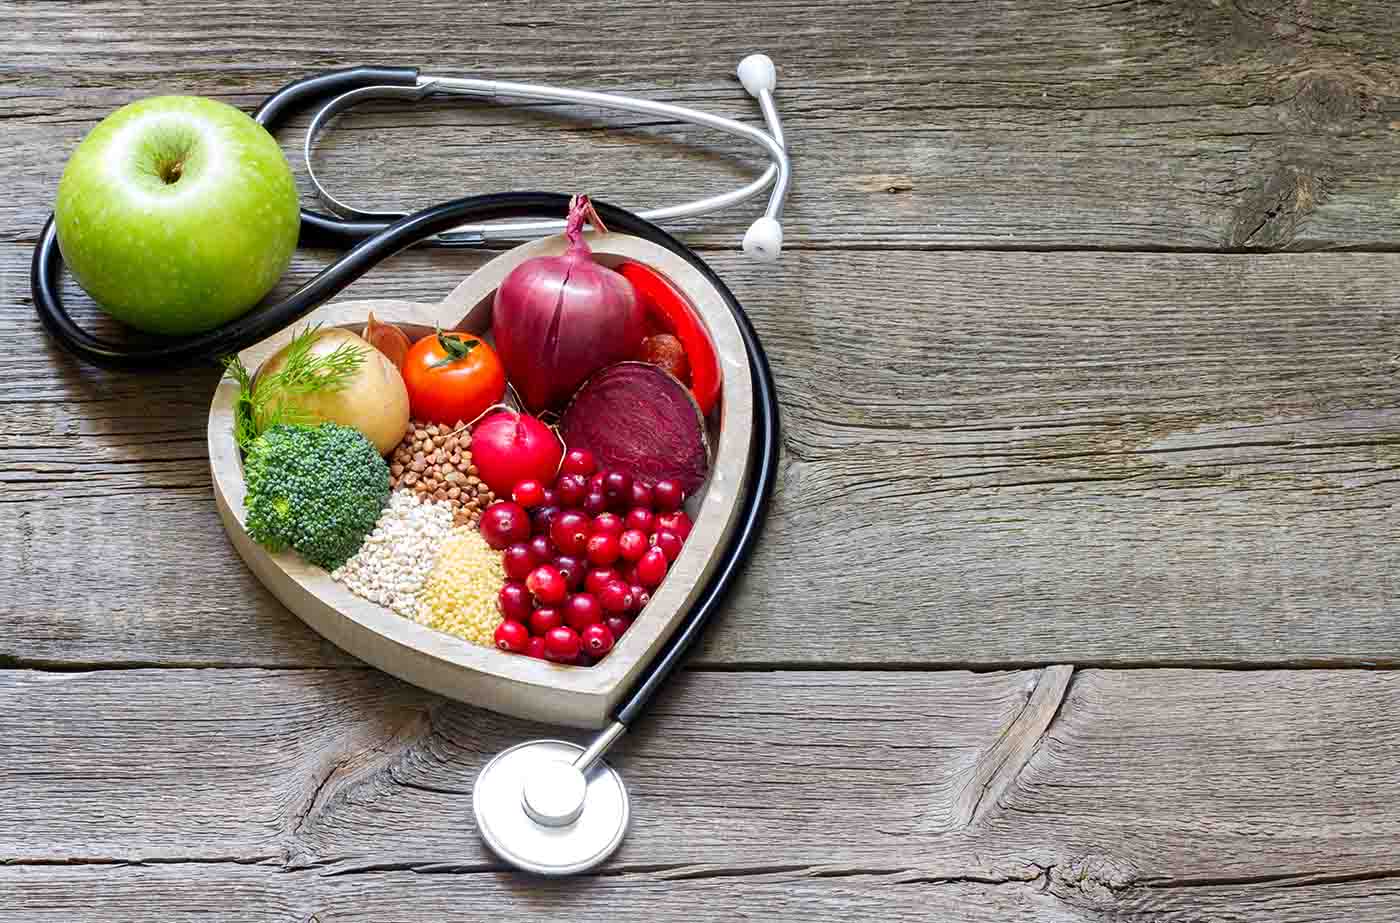 American Heart Month: Taking Stock of Your Heart Health